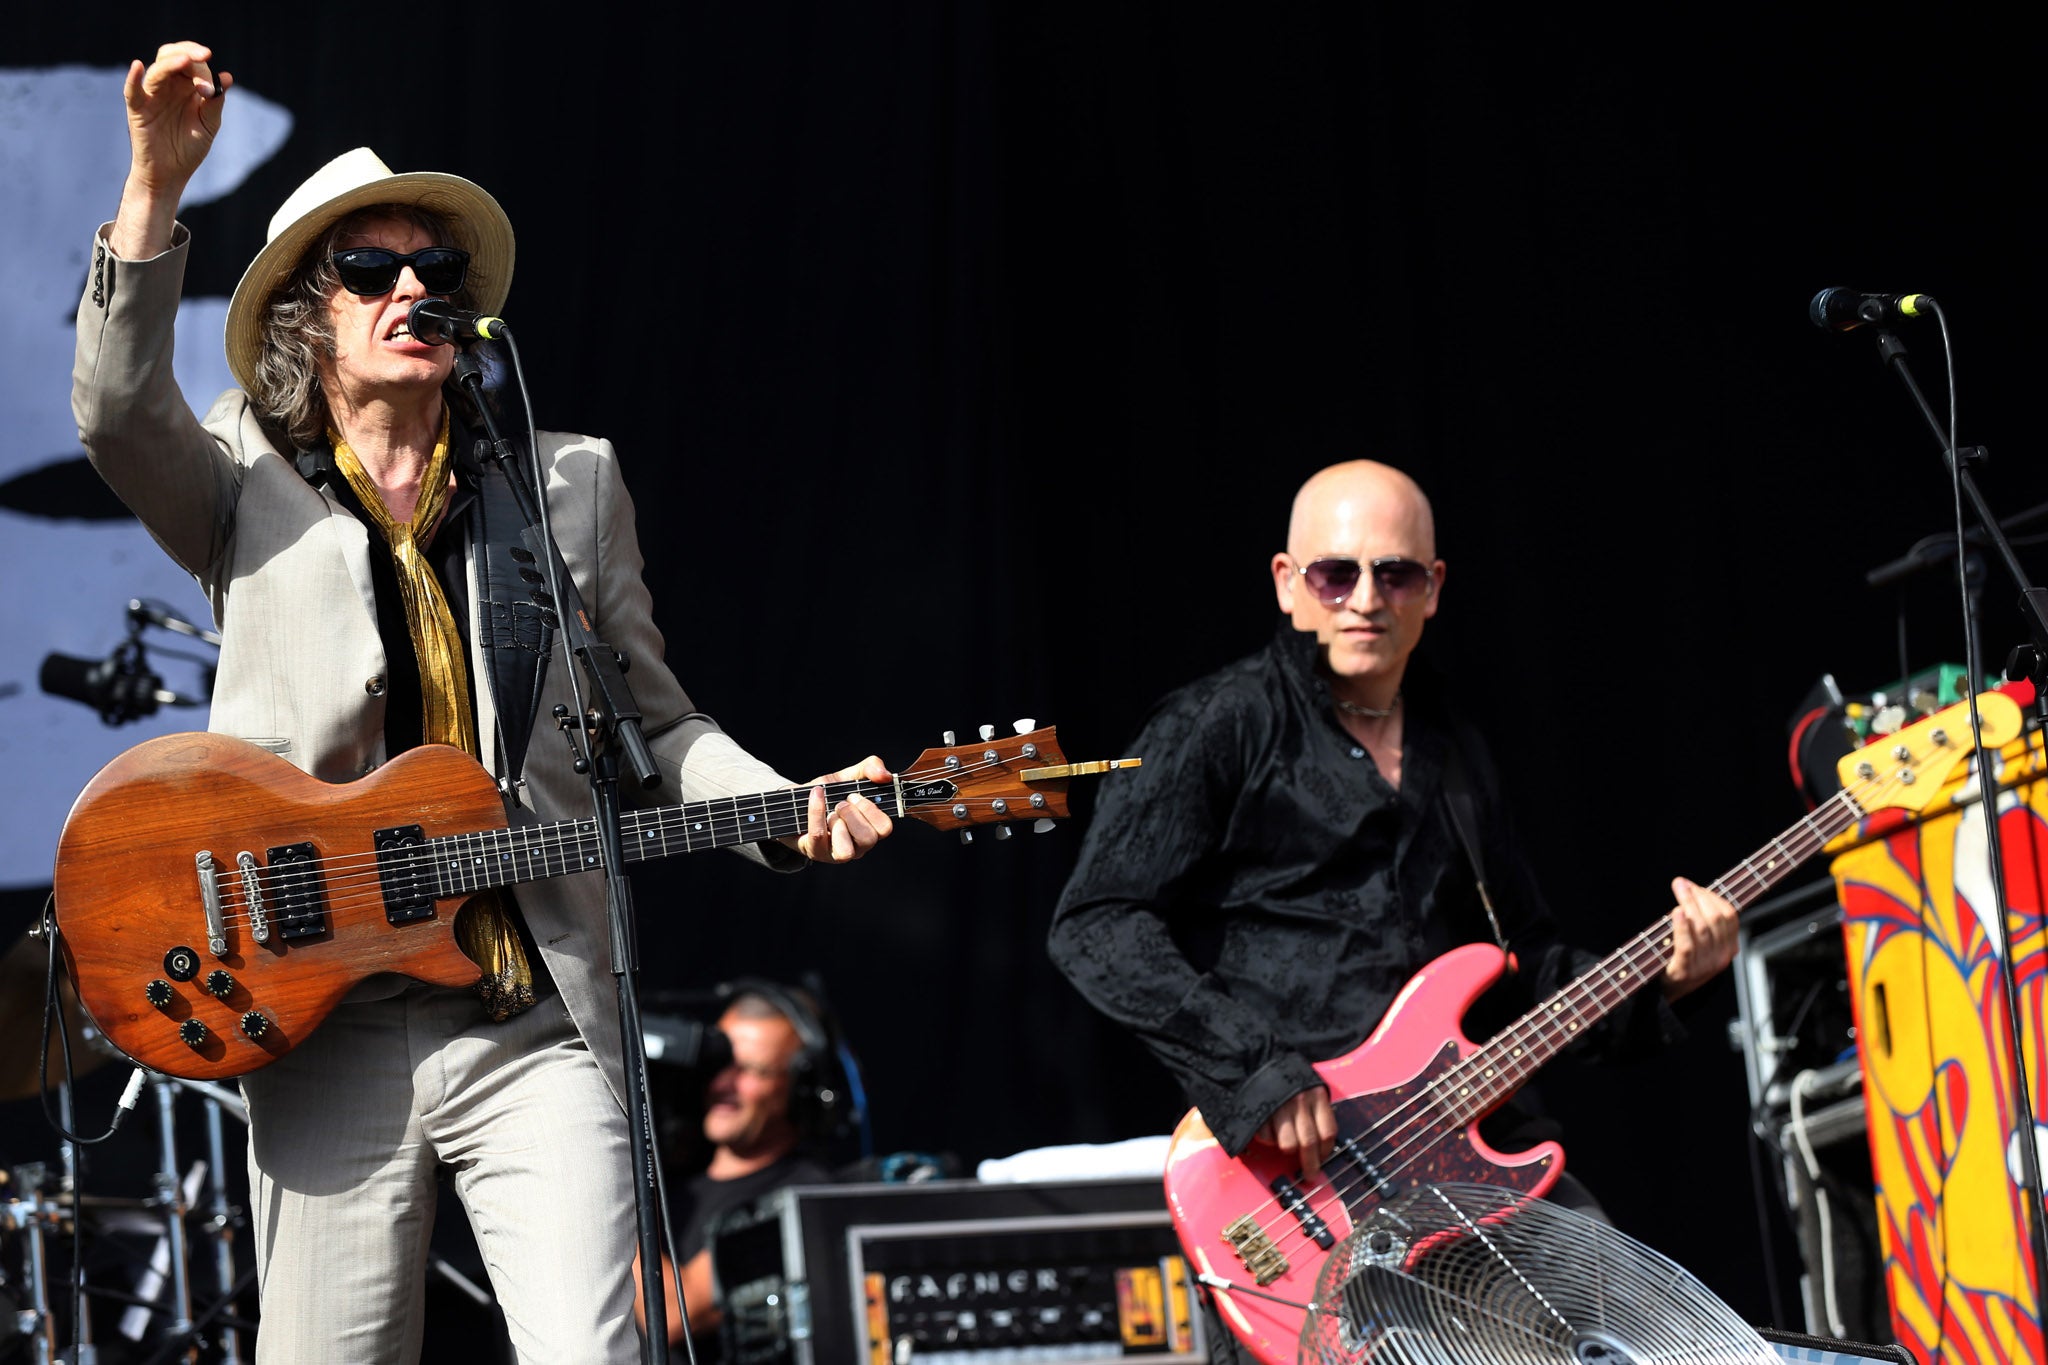 Mike Scott, singer of British band 'The Waterboys' and violinist Steve Wickham (L) perform on stage